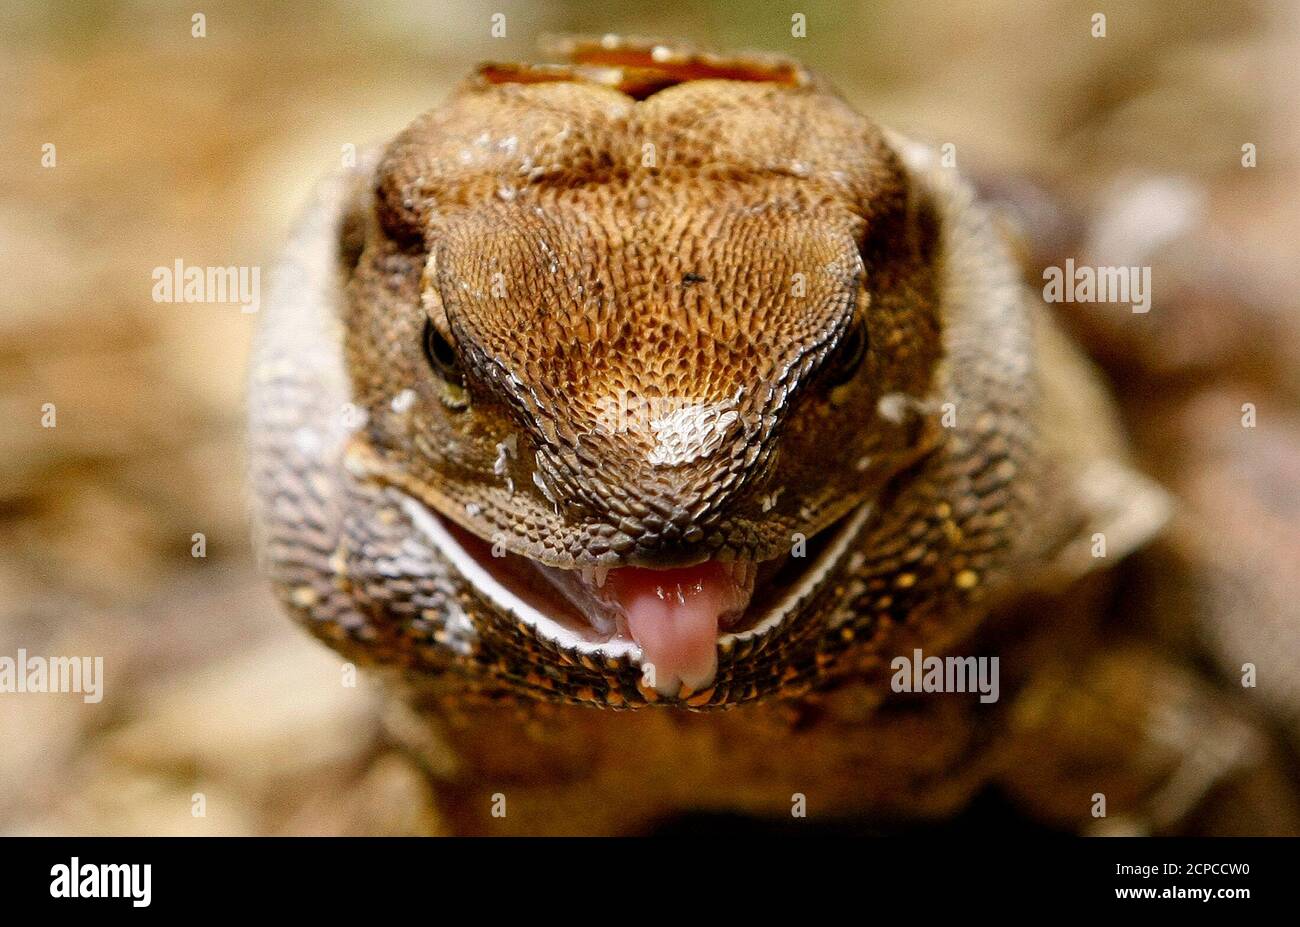 An adult frill-neck lizard (Chlamydosaurus Kingii) pokes its tongue during feeding time at Sydney Wildlife World April 10, 2008. The lizards are generally found in Australia's tropical climates in the north and northwest. Females lay an average of 15 eggs, which take about 3-4 months to hatch.    REUTERS/Mick Tsikas          (AUSTRALIA) Stock Photo